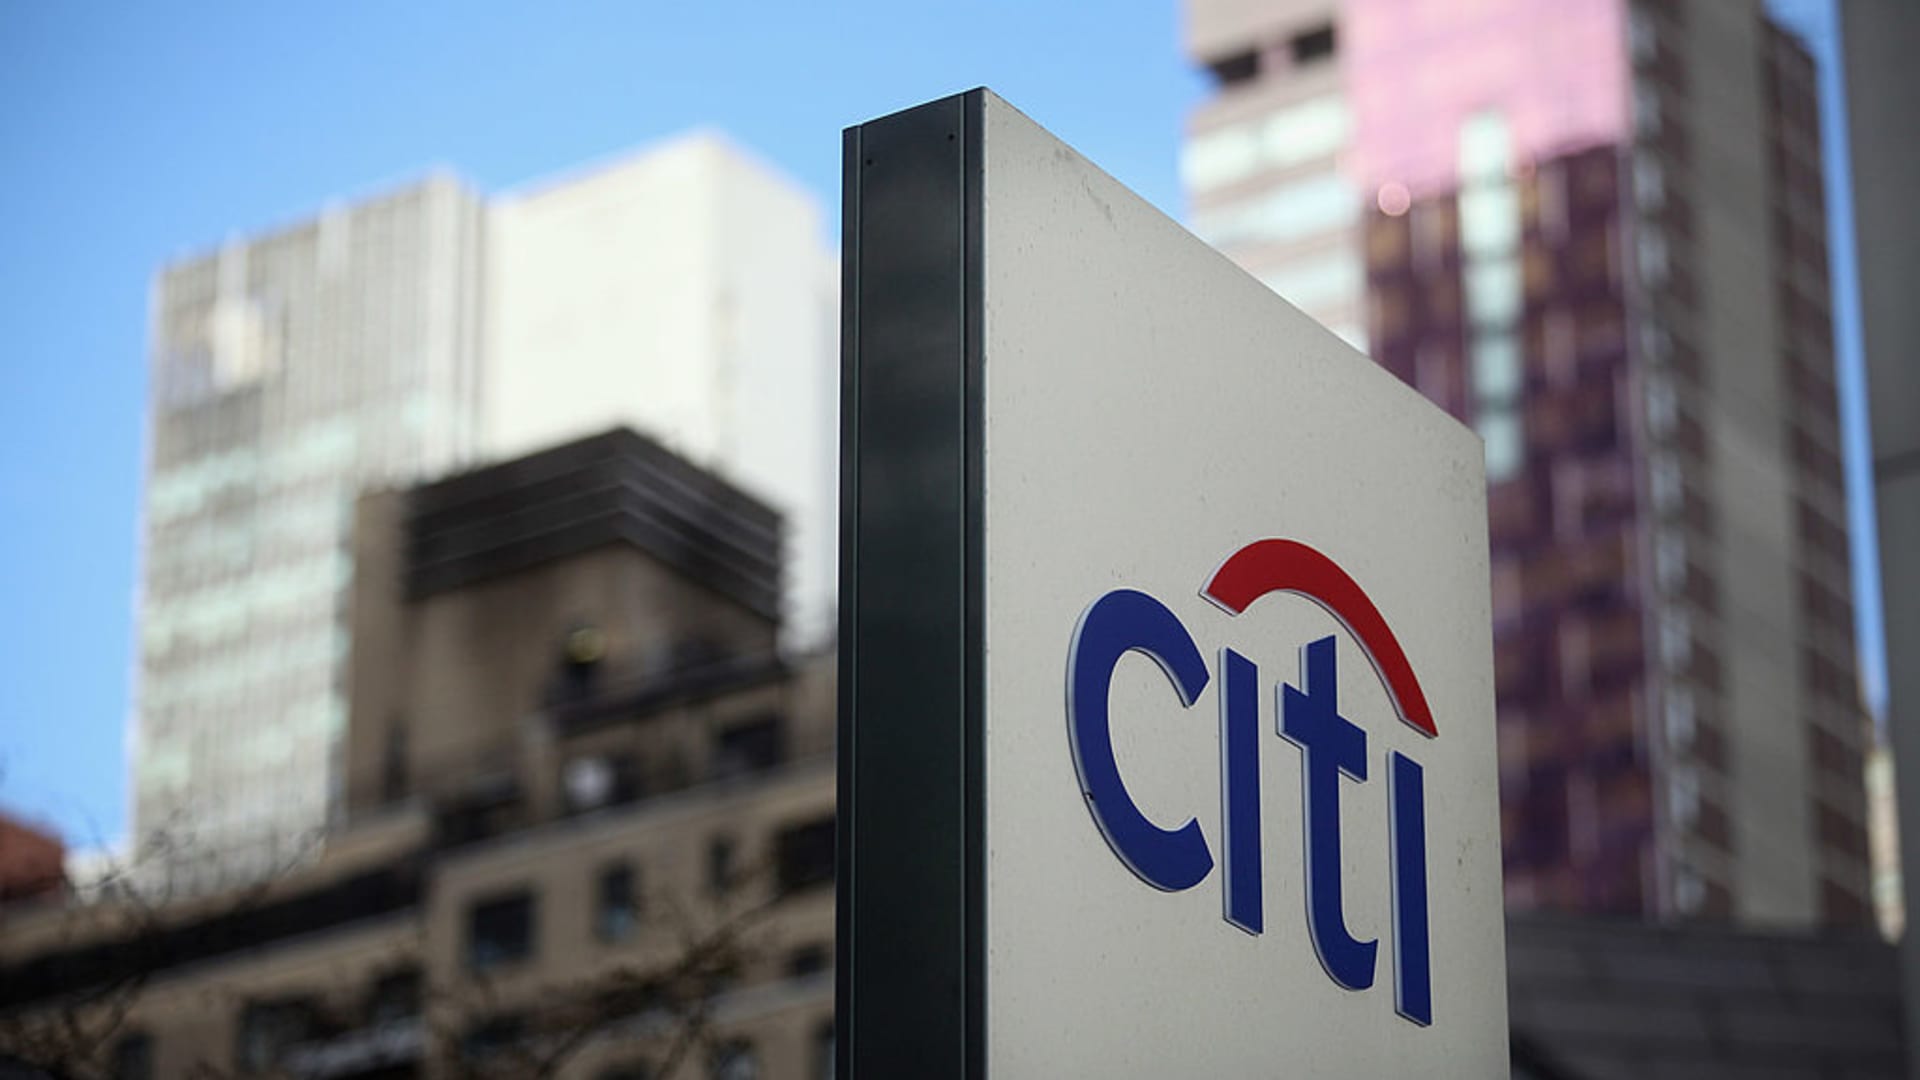 Citigroup wins appeal over botched Revlon wire transfer